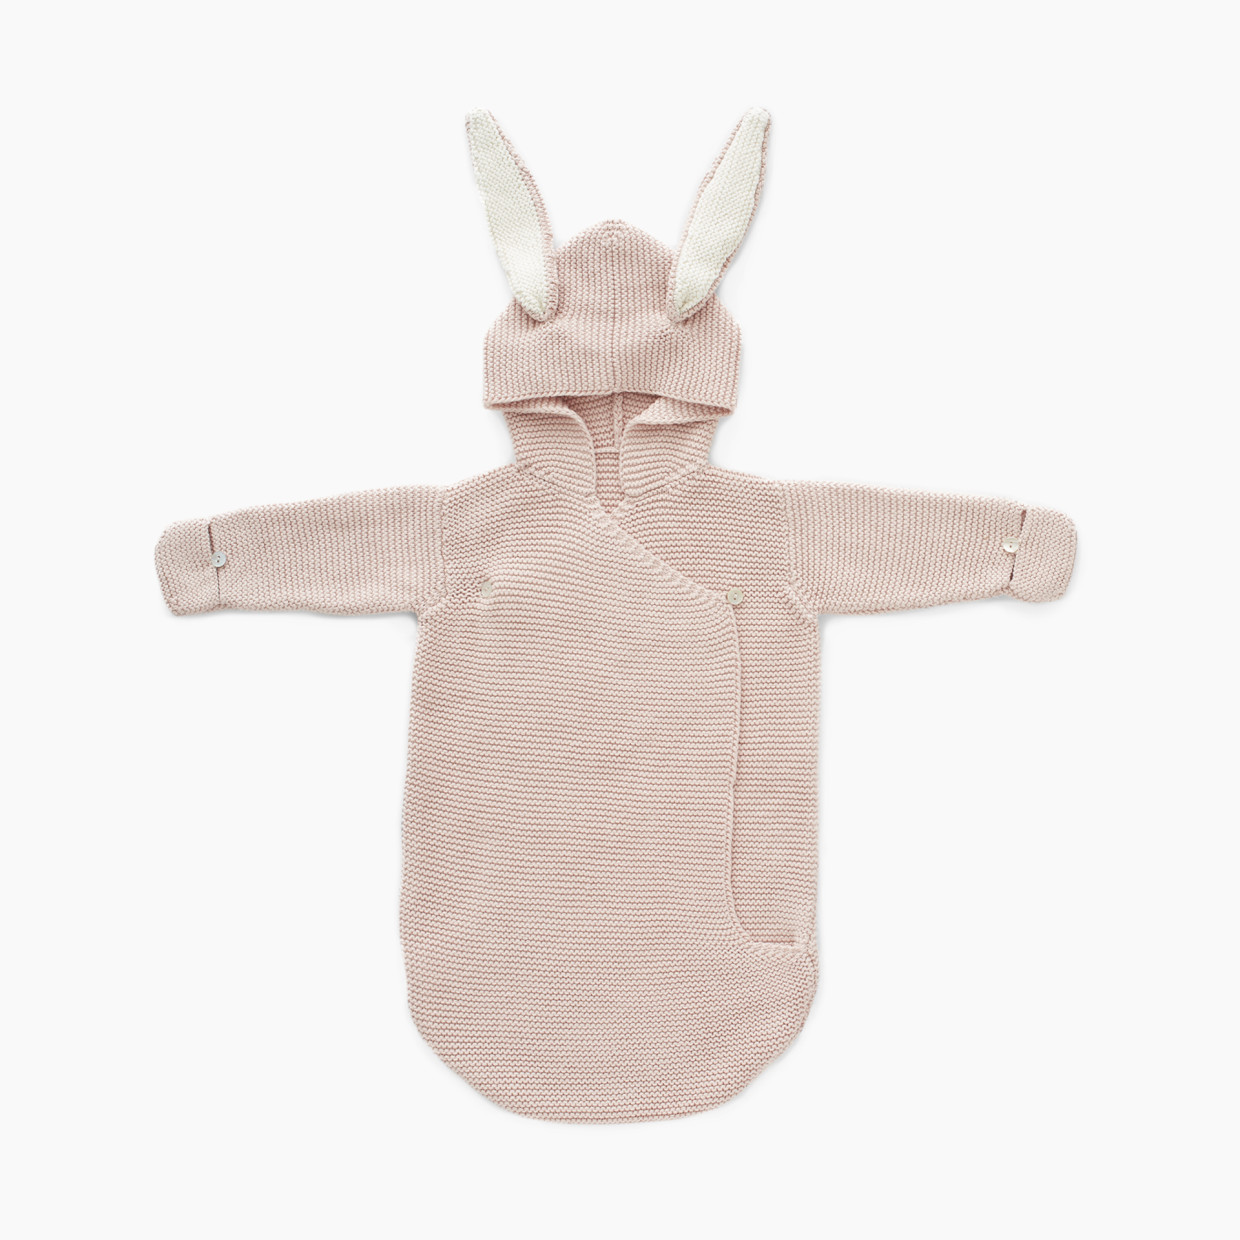 Oeuf Bunny Wrap - Light Pink, One Size.